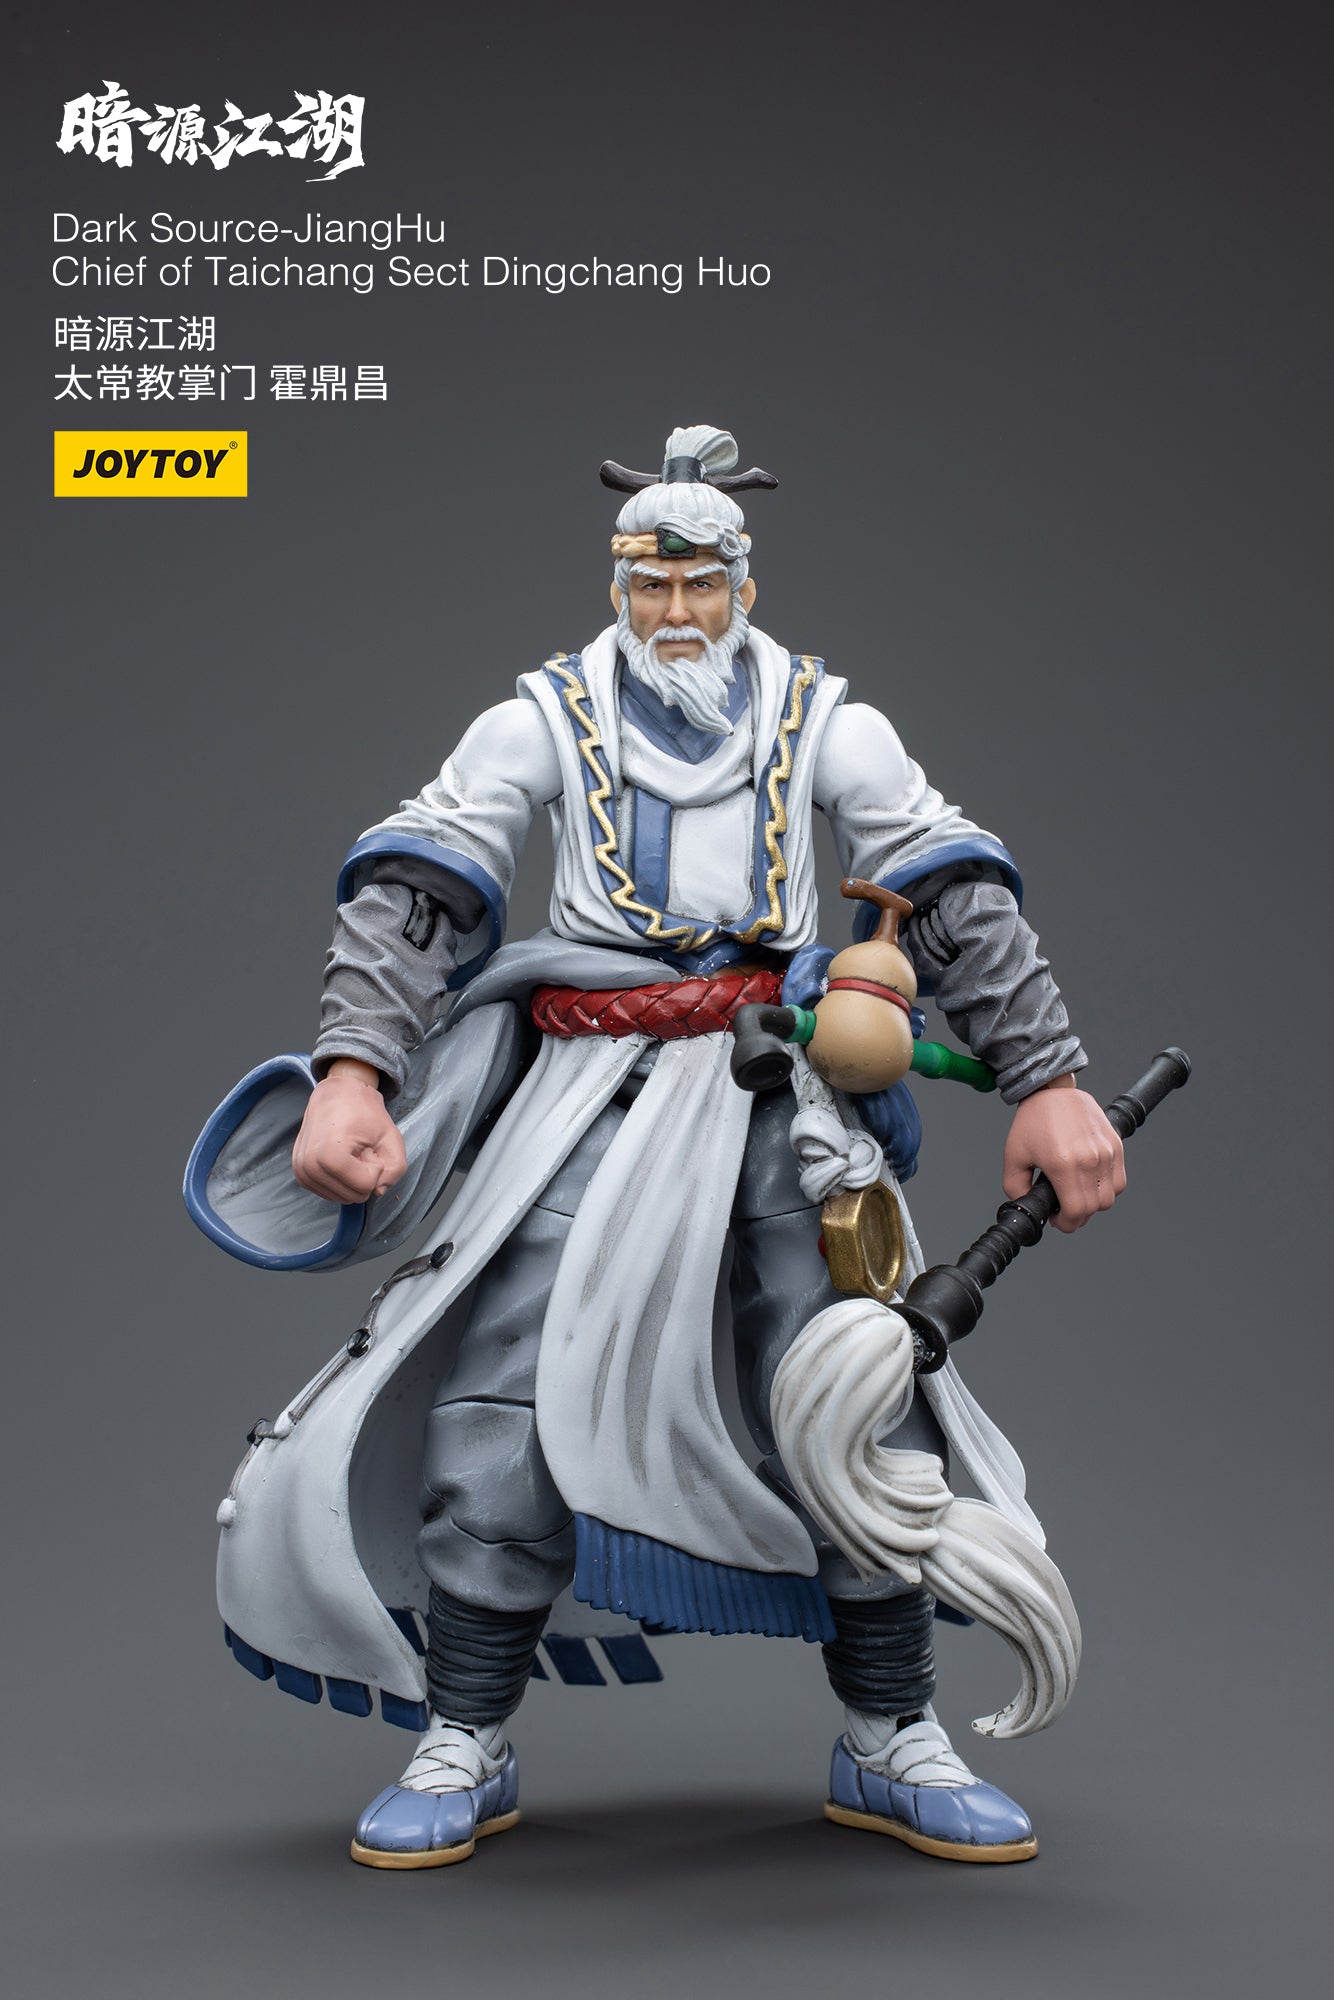 Joy Toy Dark Source Jianghu Chief of Taichang Sect Dingchang Huo figure is incredibly detailed in 1/18 scale. JoyToy, each figure is highly articulated and includes accessories. 